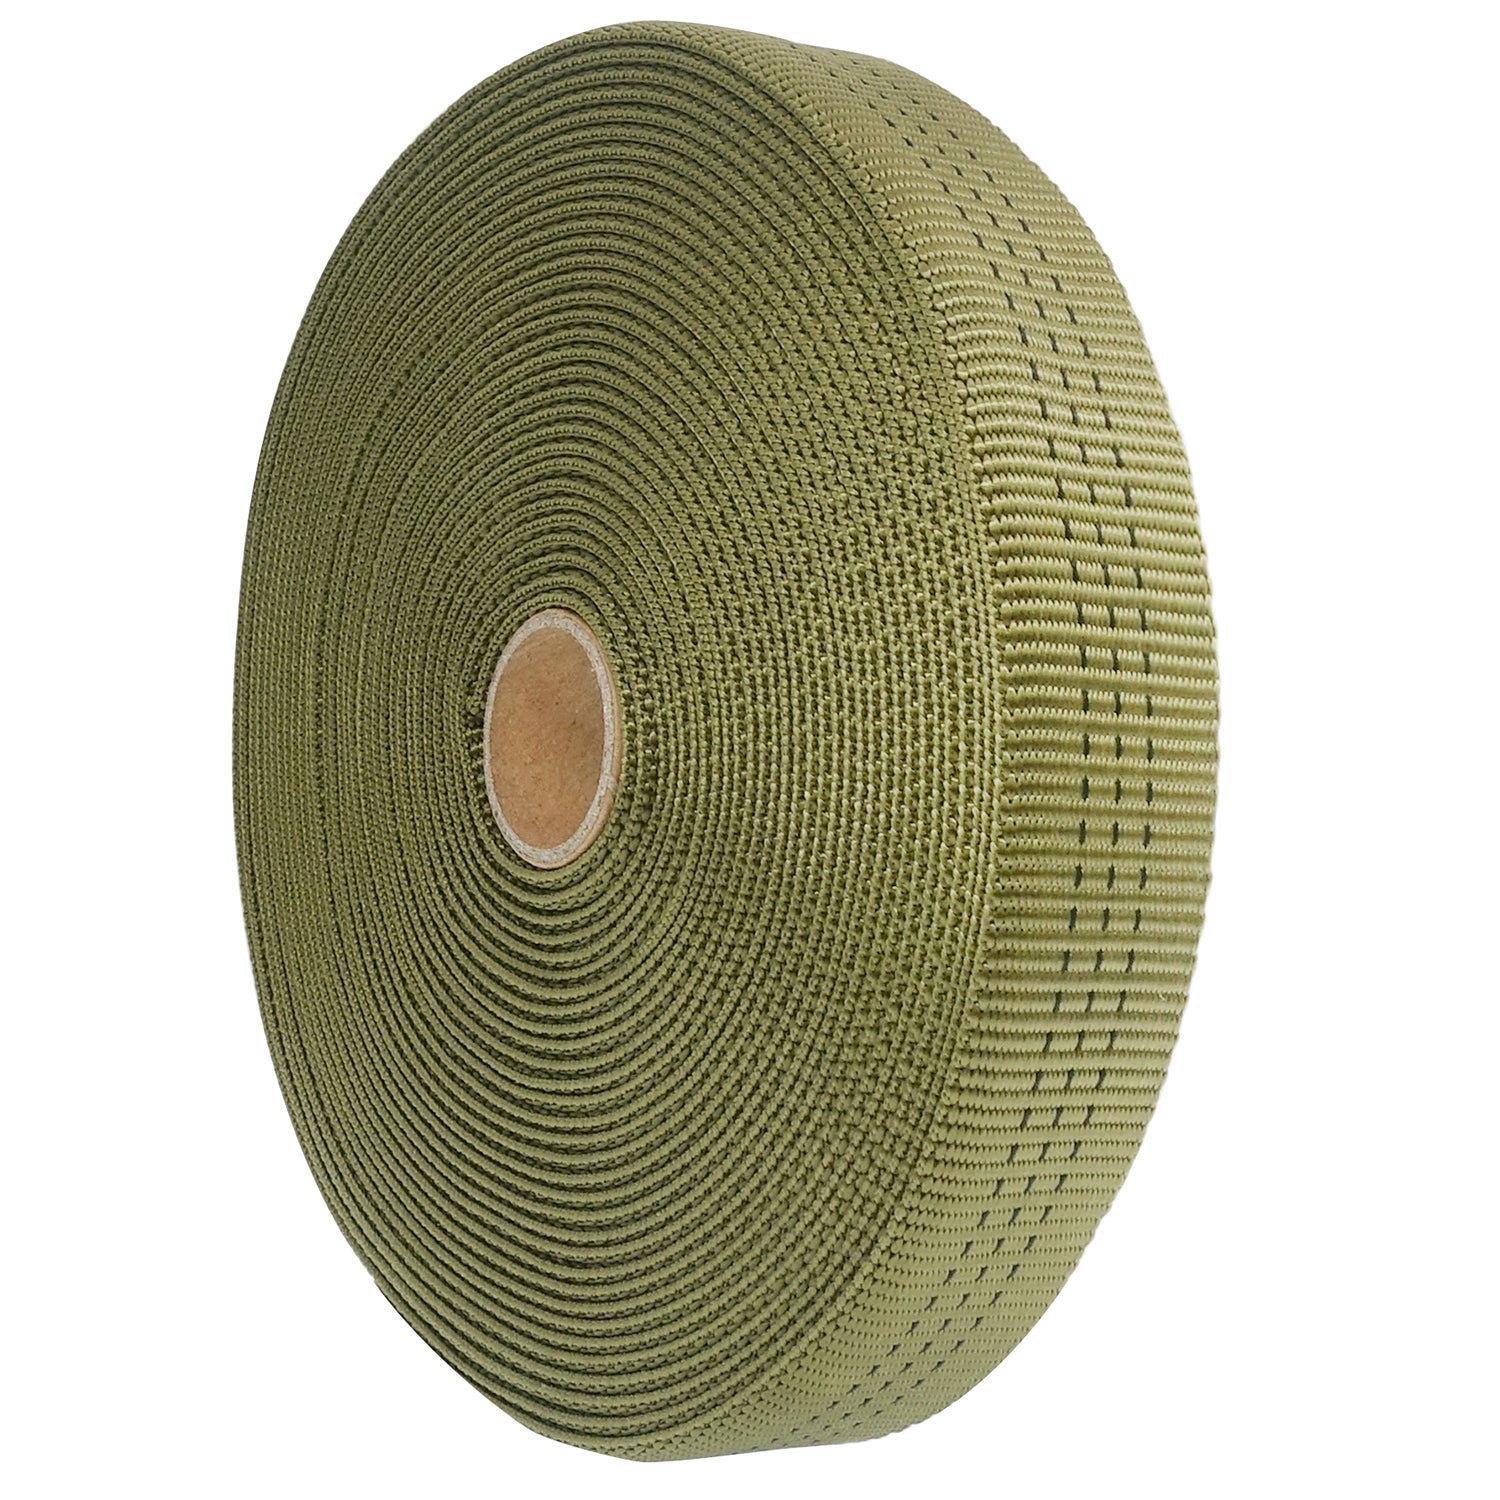 GM CLIMBING 1 inch Nylon Tubular Webbing Tape UIAA Certified 4000lb Heavy  Duty for Climbing Rescue Rope Works Survival Outdoor General Purposes 1 x  30Ft / 10 Yards Olive 1 inch x 10 yards